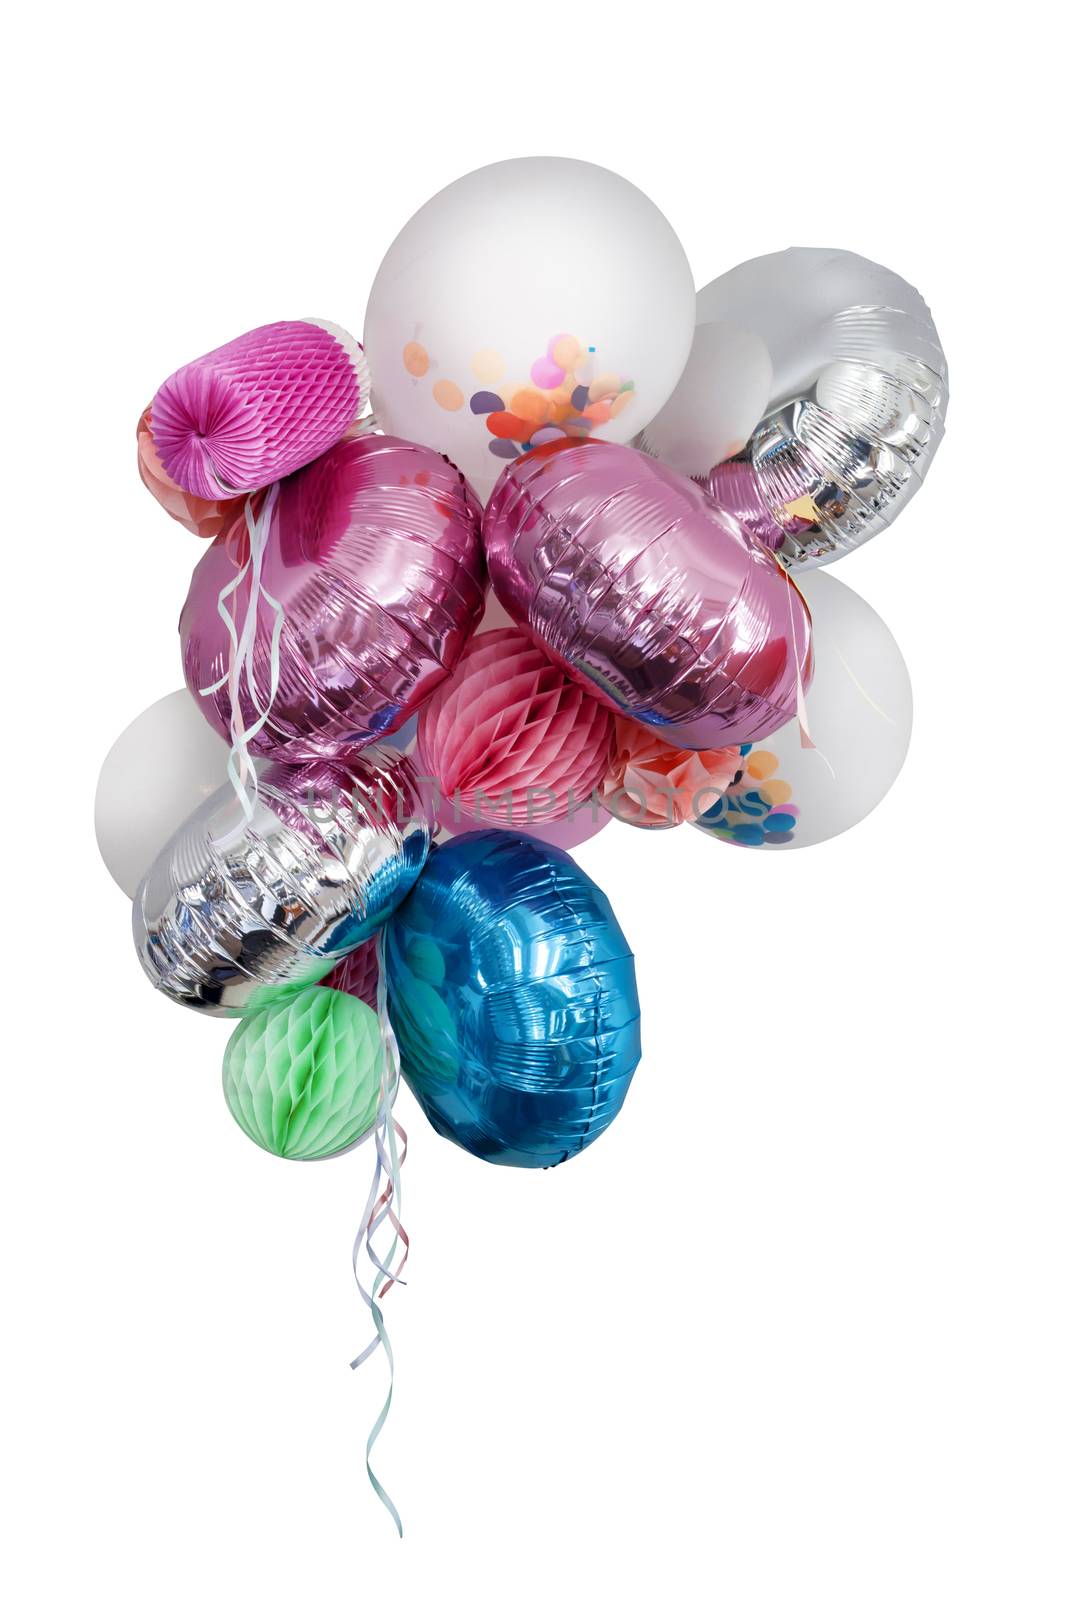 Colorful balloons on white by Tjeerdkruse